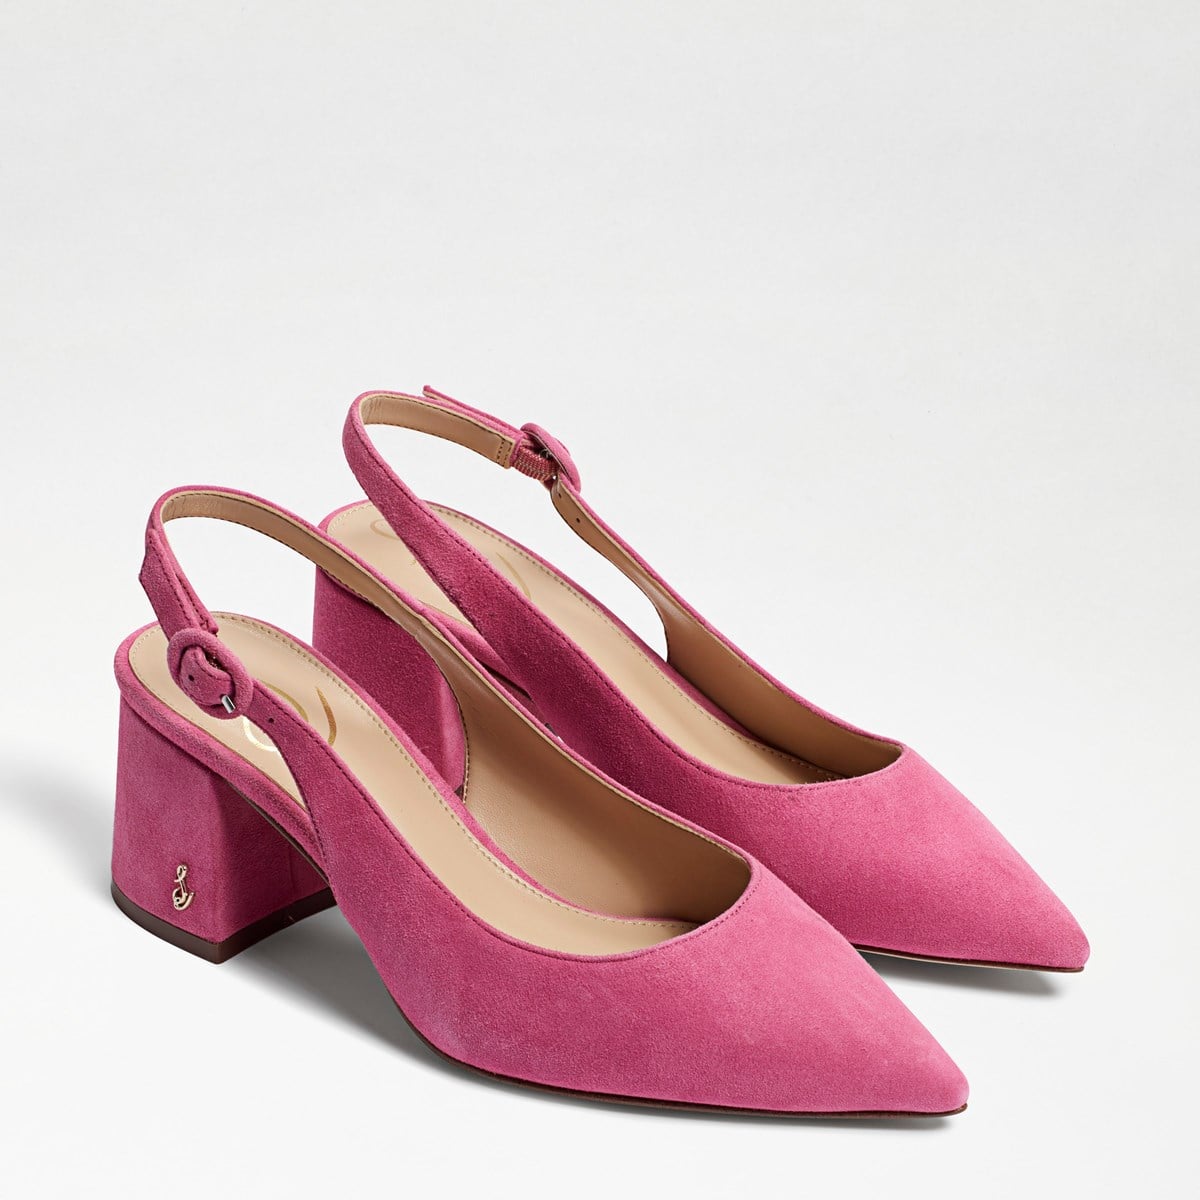 Sam Edelman Petra Pointed Toe Slingback Pink Confetti Suede 6khL